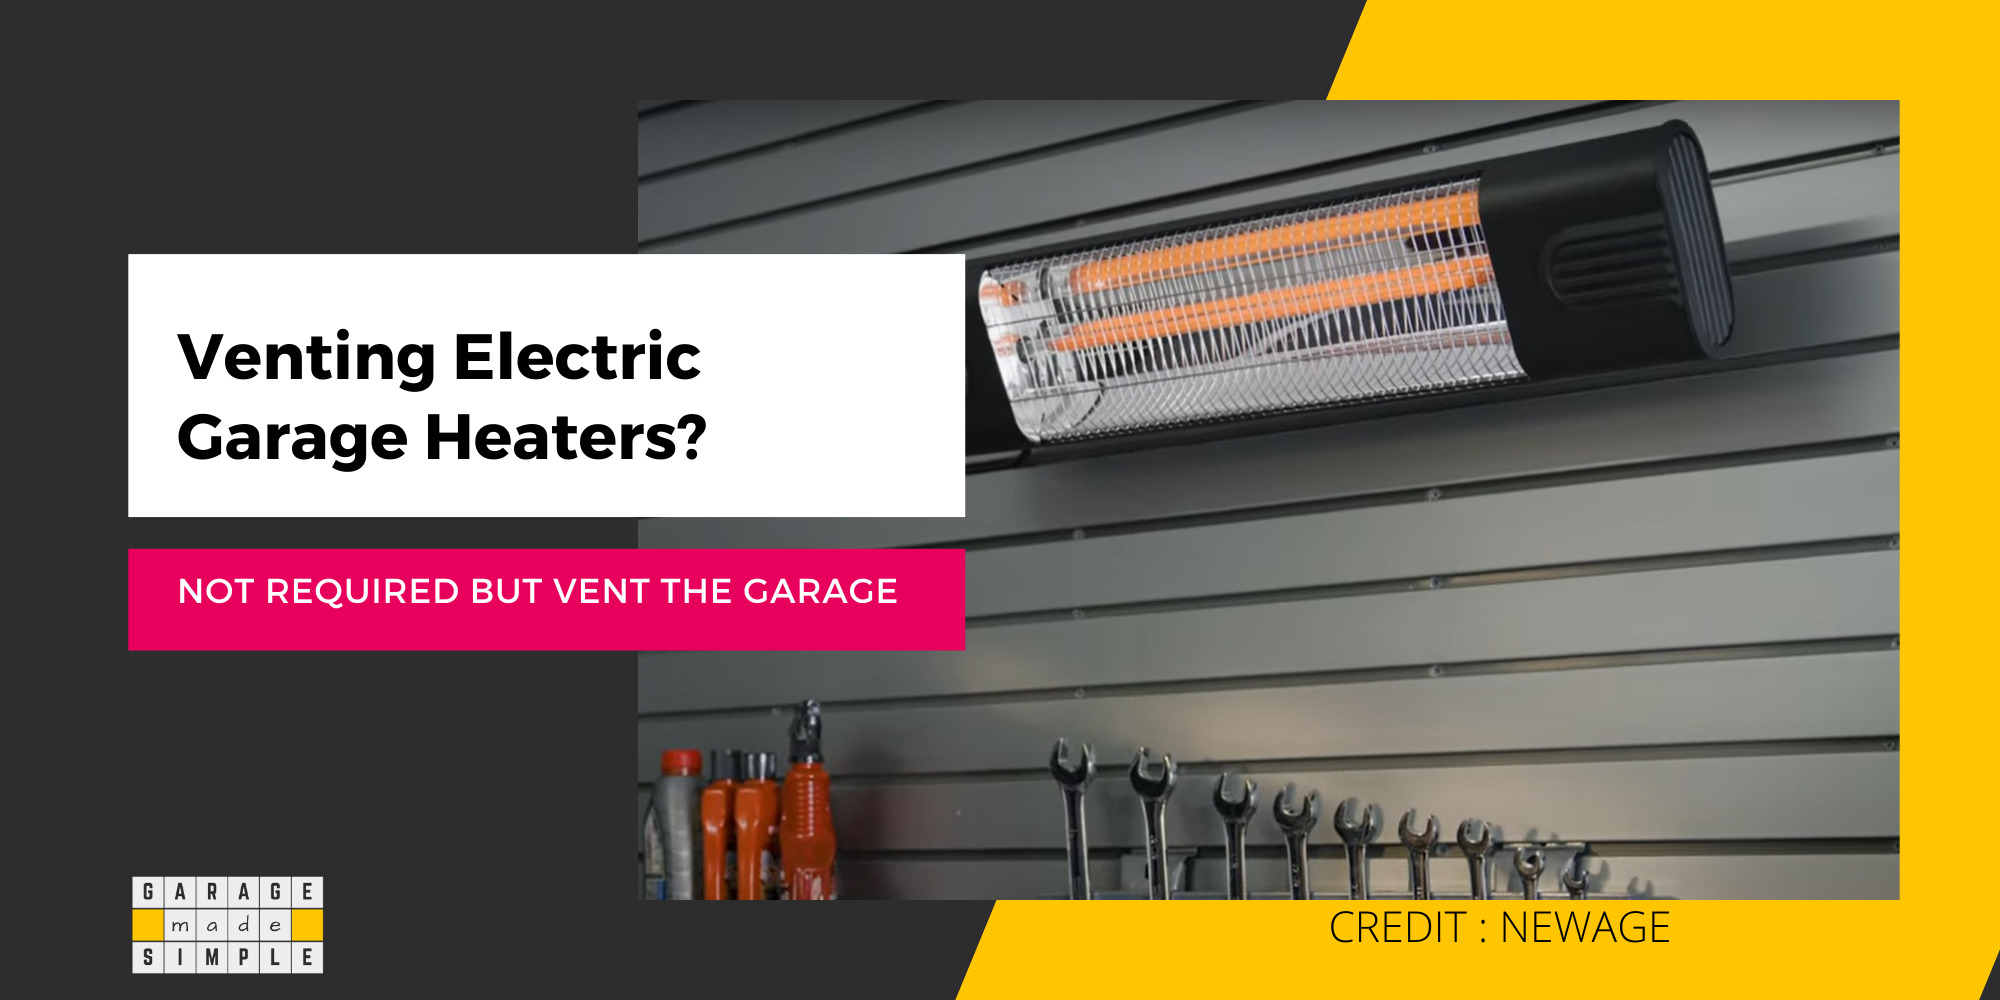 Do You Need to Have Electric Garage Heaters Vented?